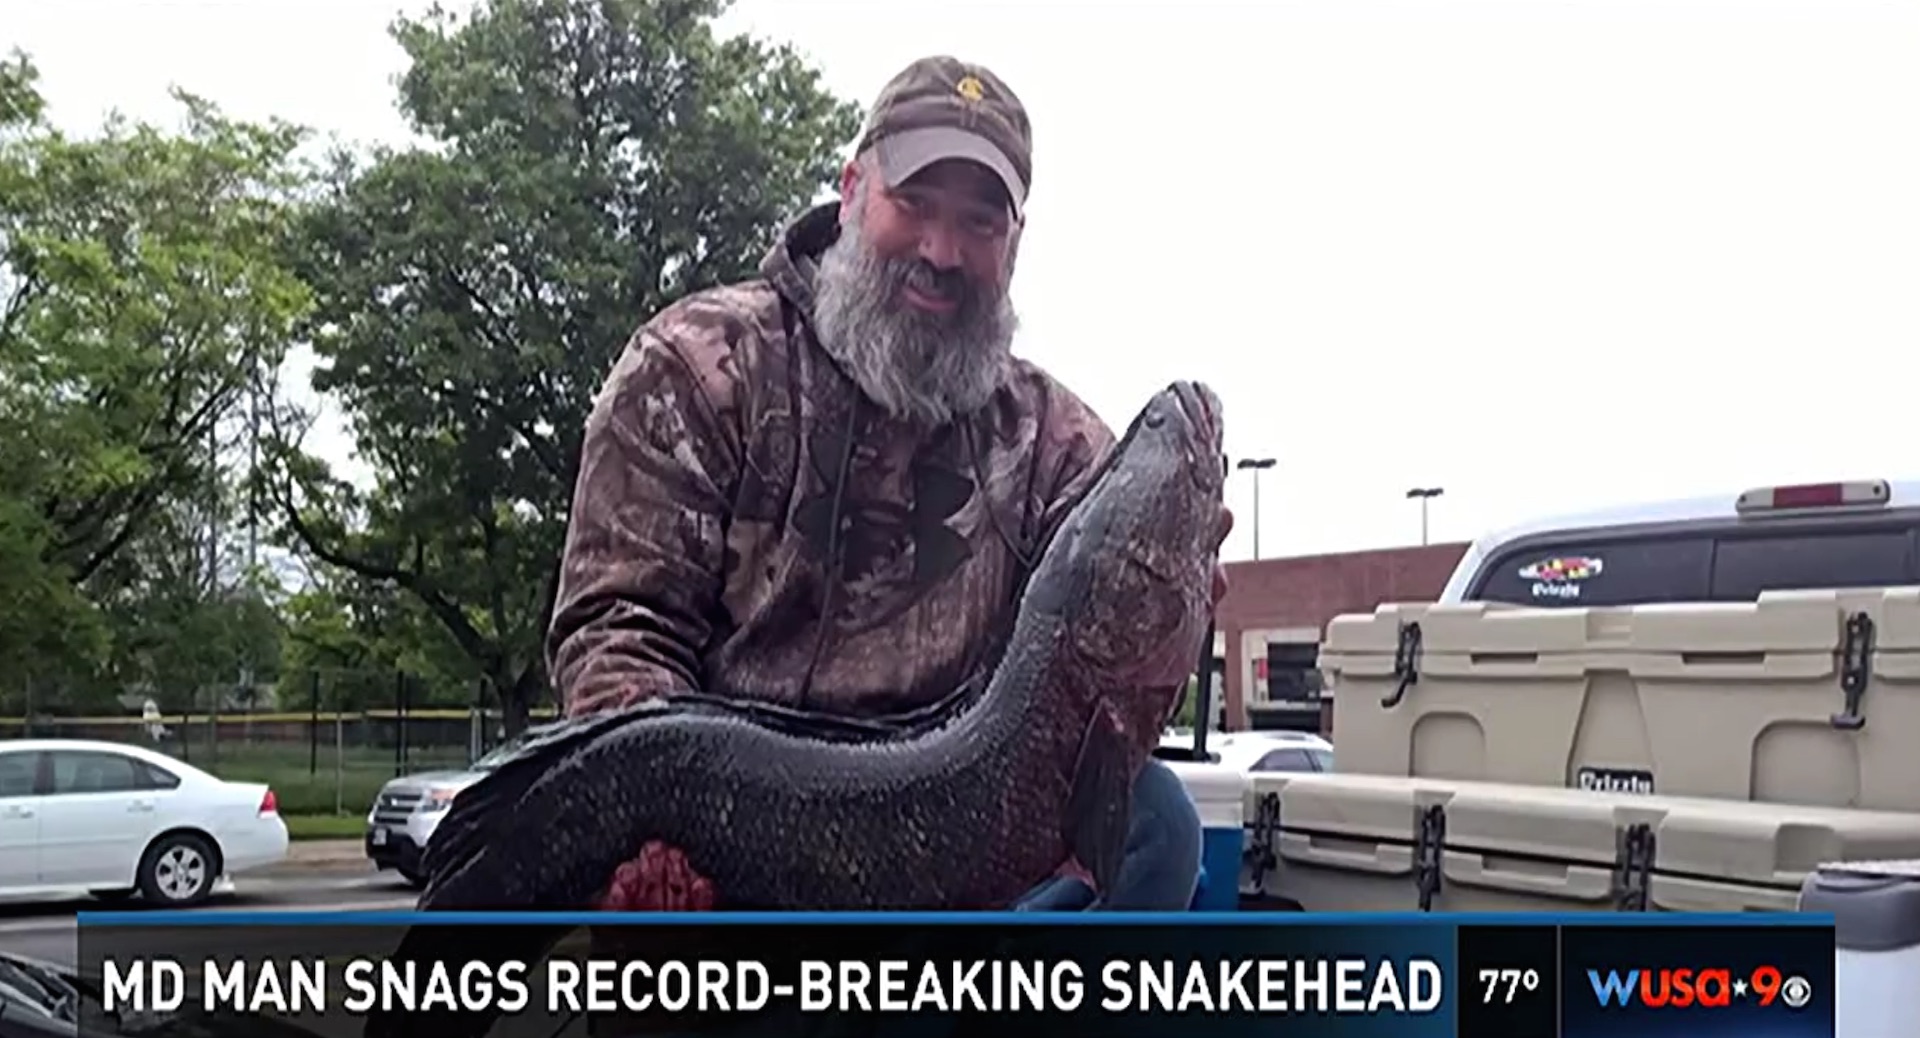 At first it was shocking': Angler nabs an 18-pound snakehead fish in the  Potomac - The Washington Post